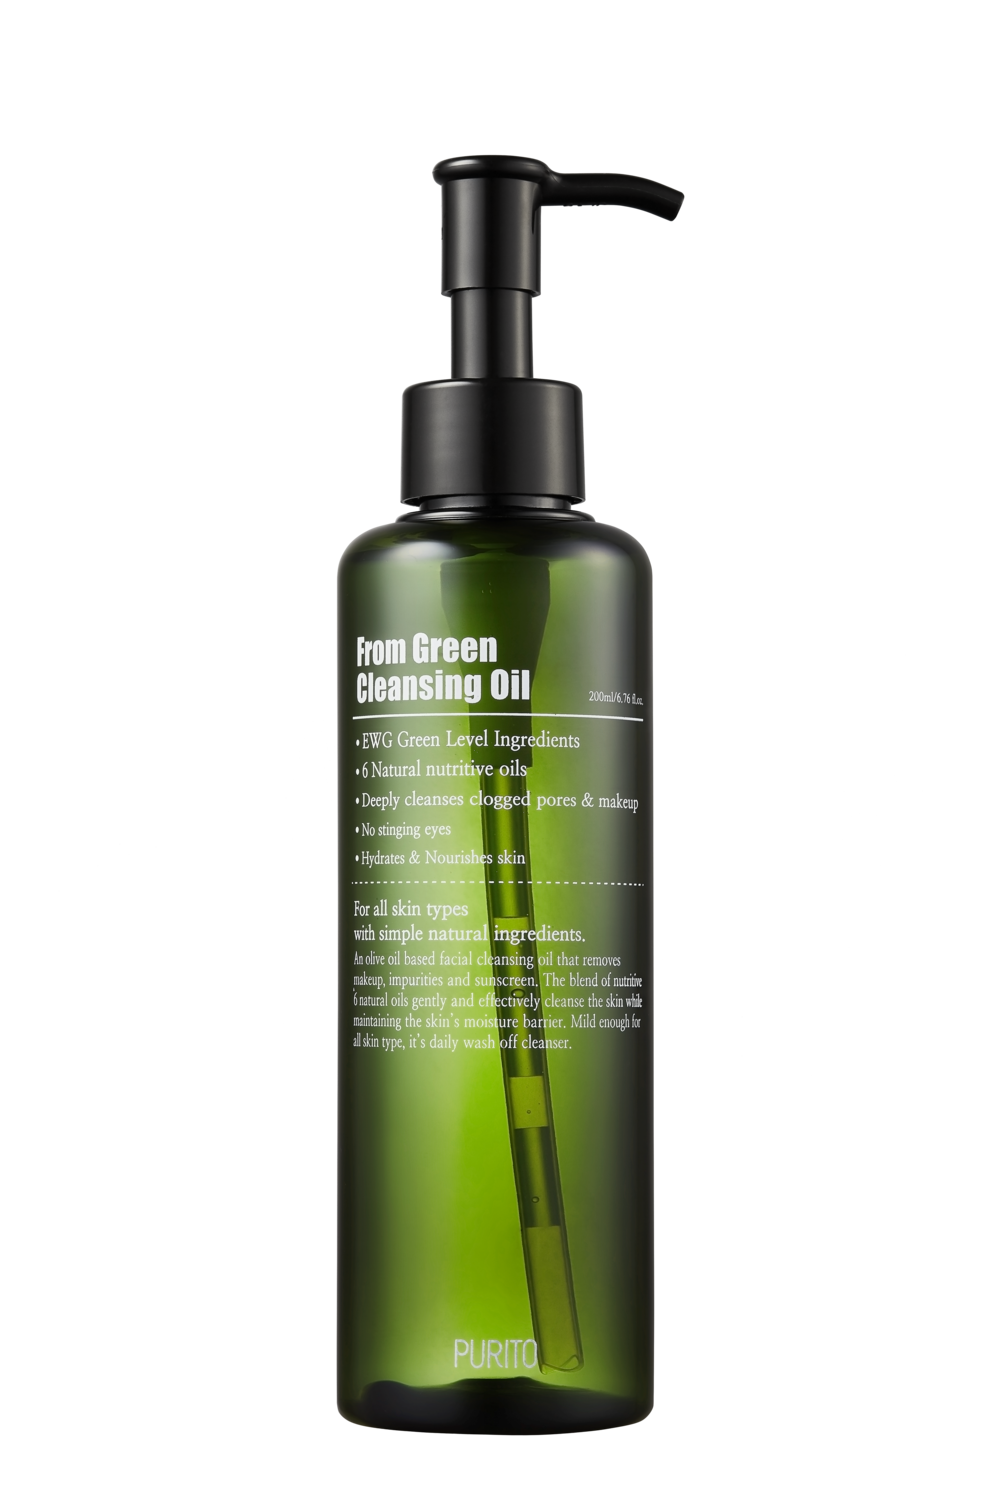 PURITO From Green Cleansing Oil - puhdistusöljy, 200ml